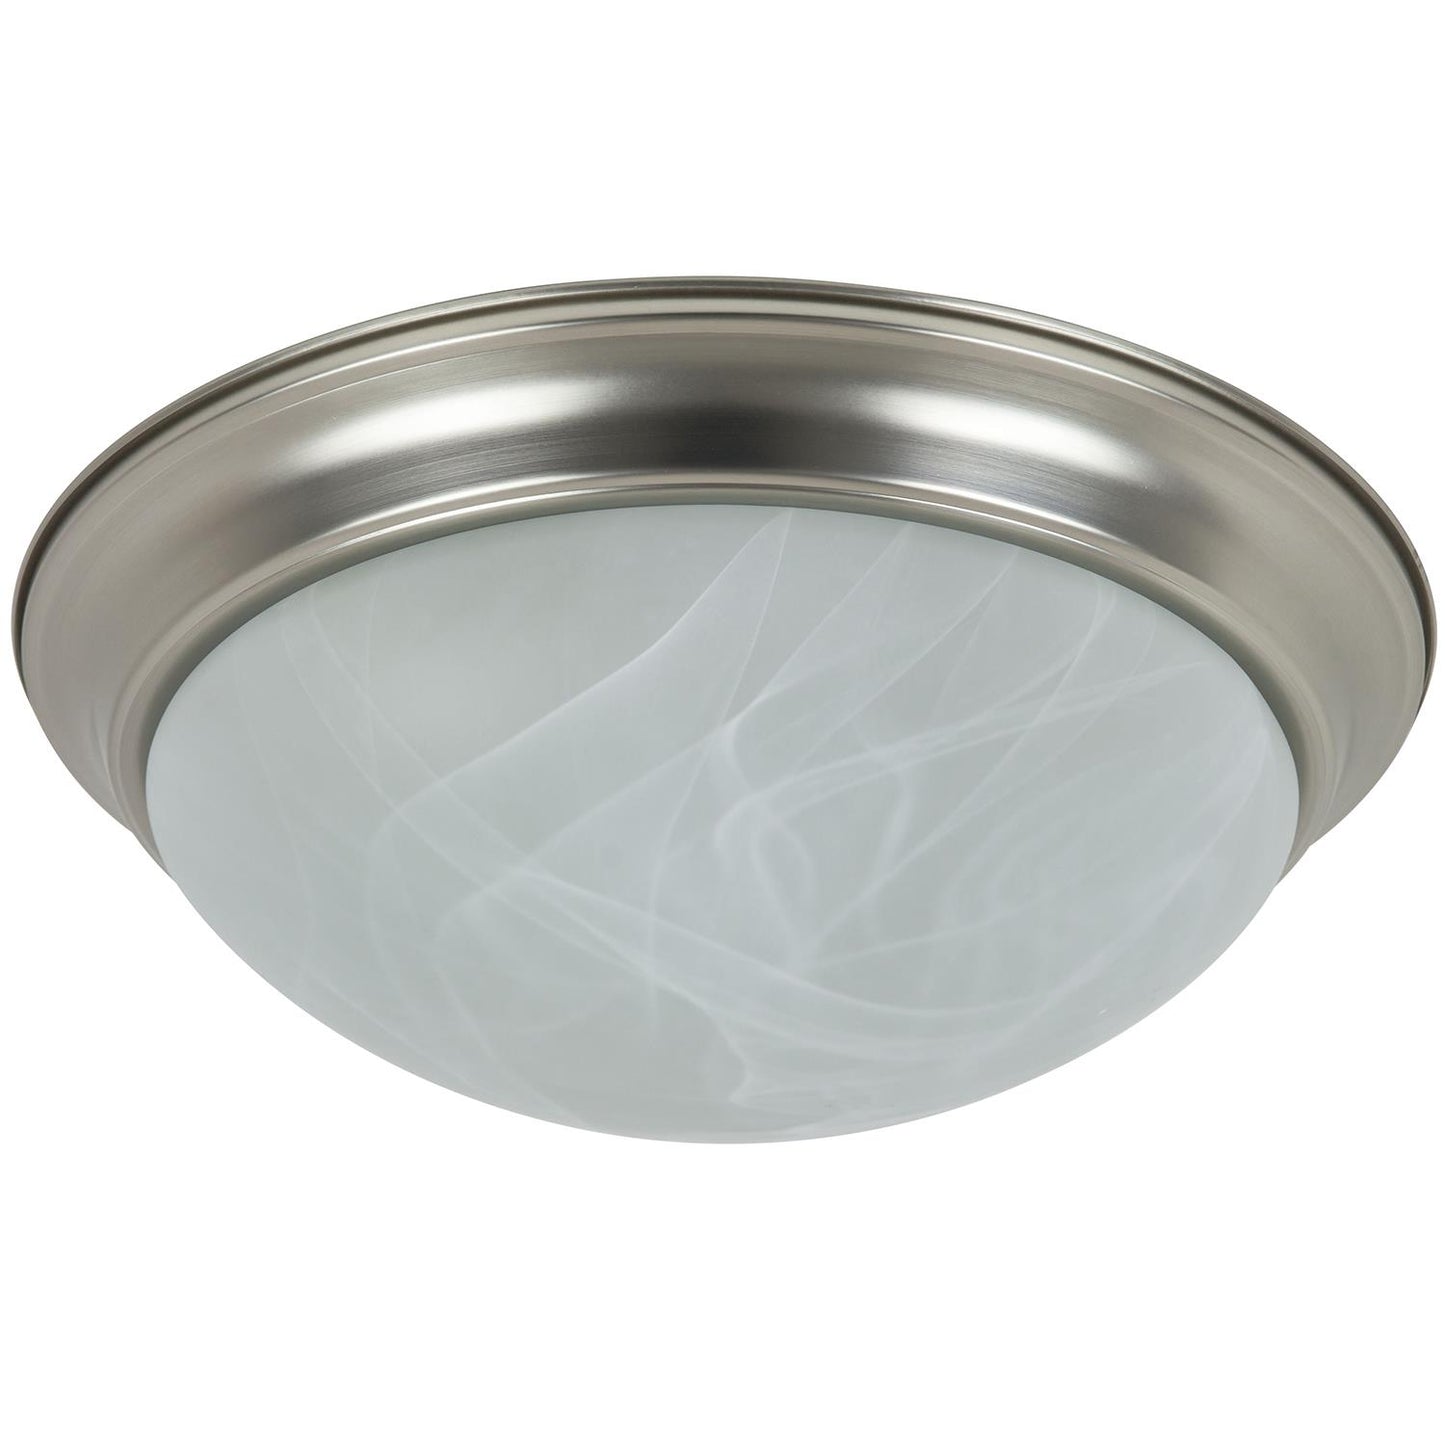 15.5 Inch Energy Saving Dome Fixture Brushed Nickel Finish Alabaster Glass